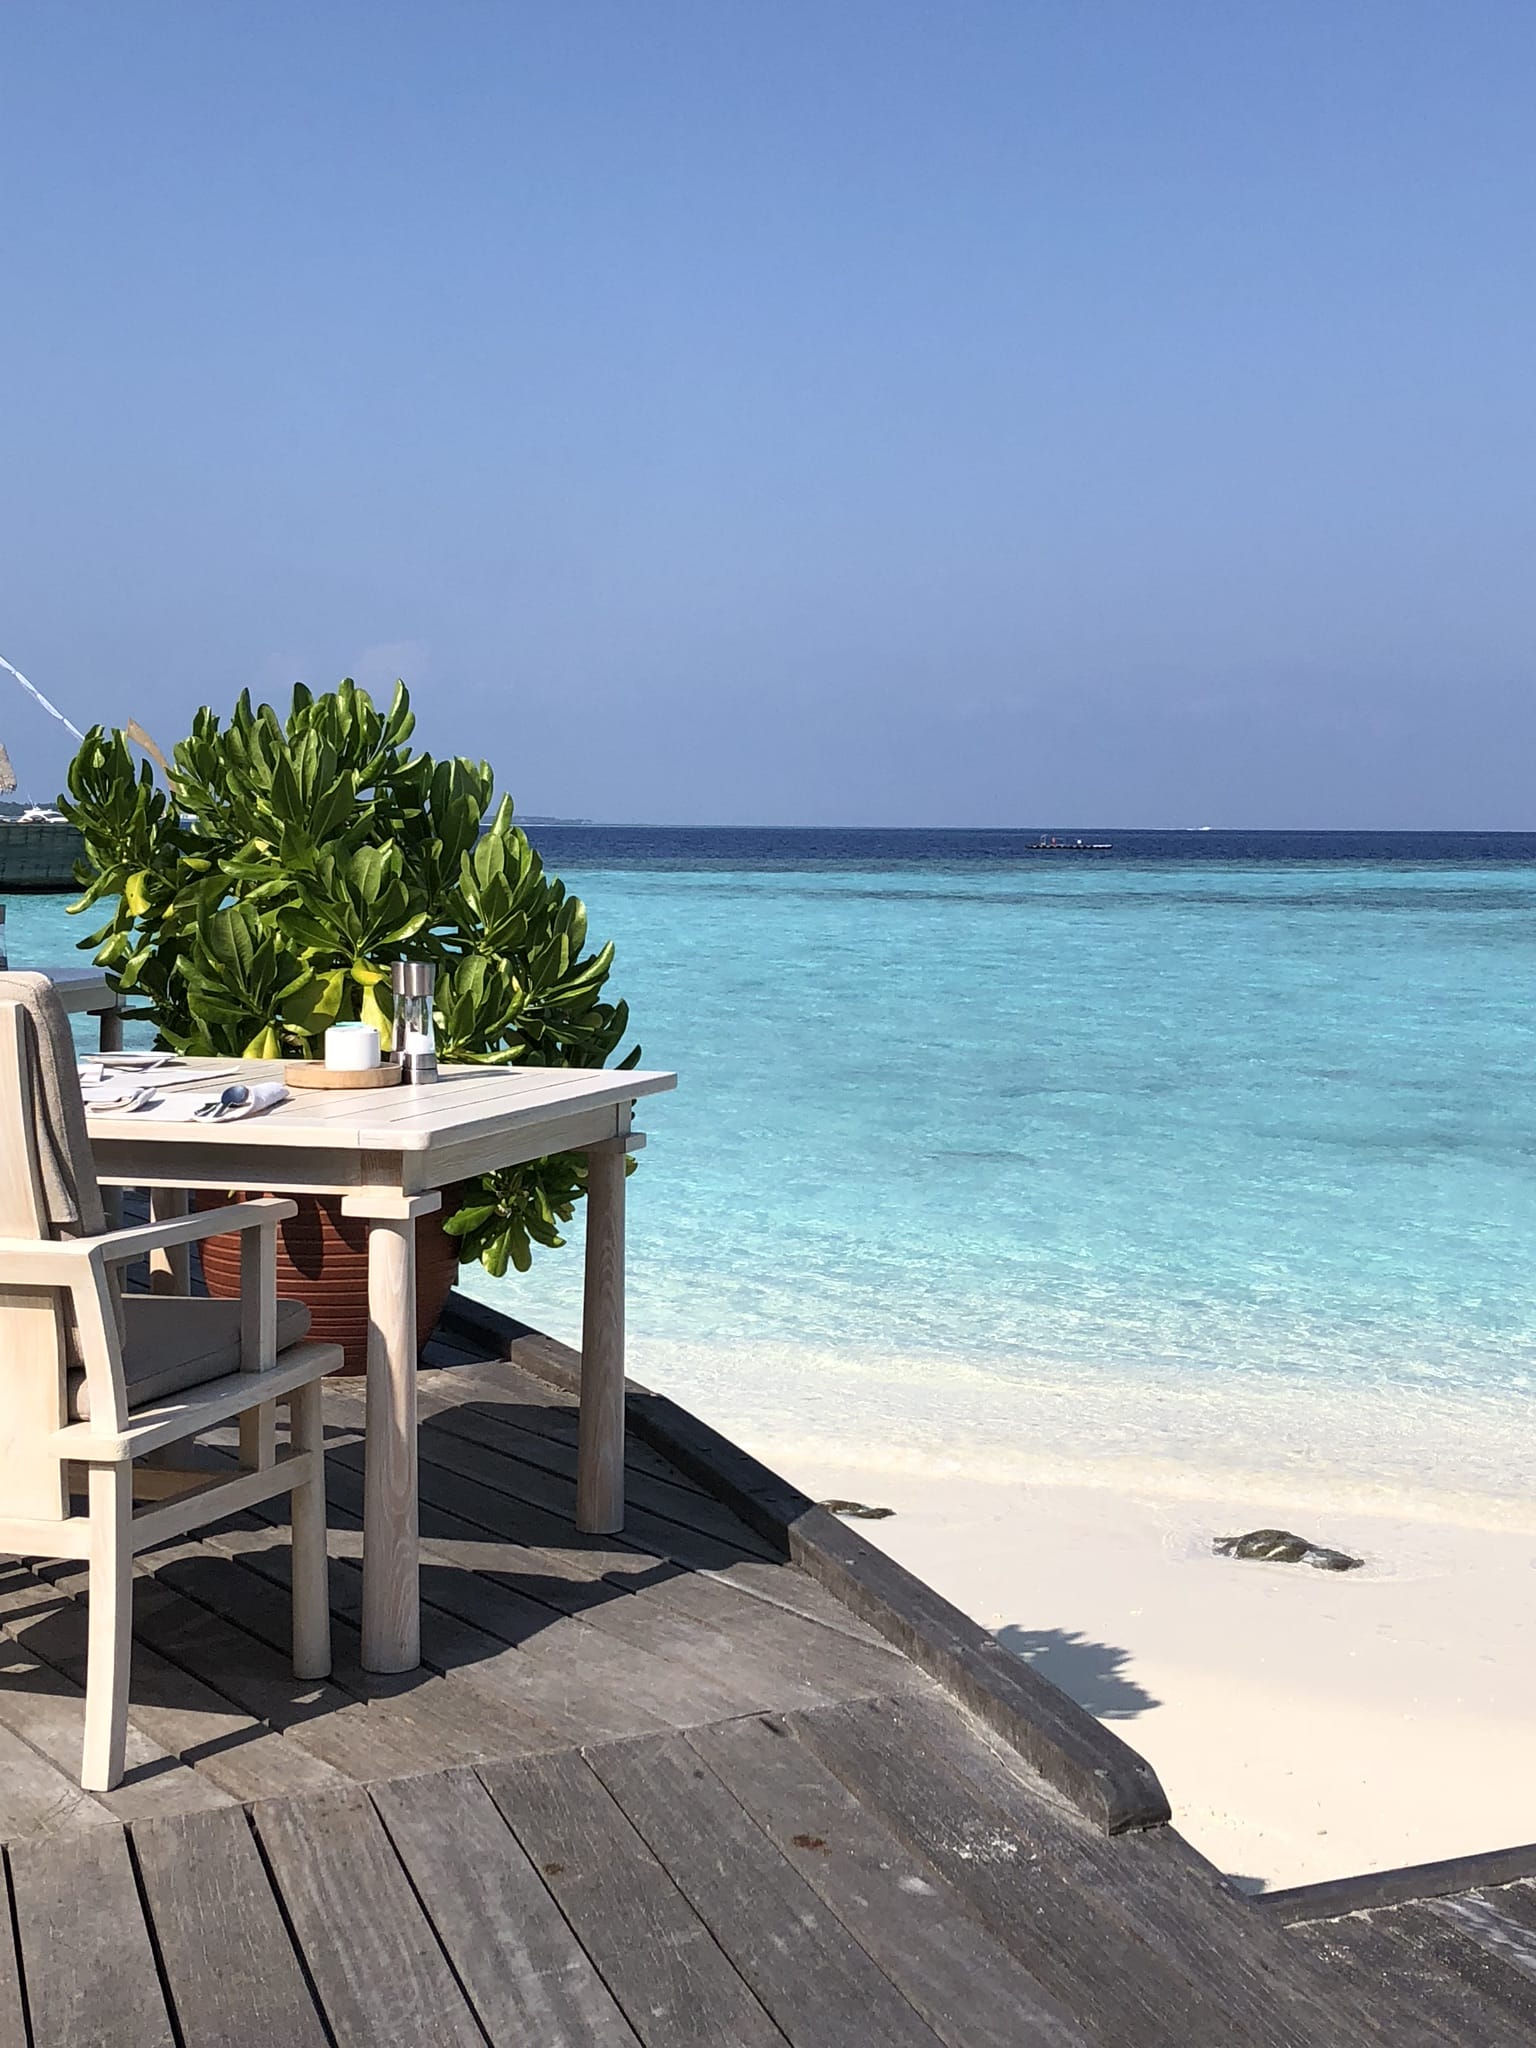 Dining view of the beach and sea at a Maldives resort